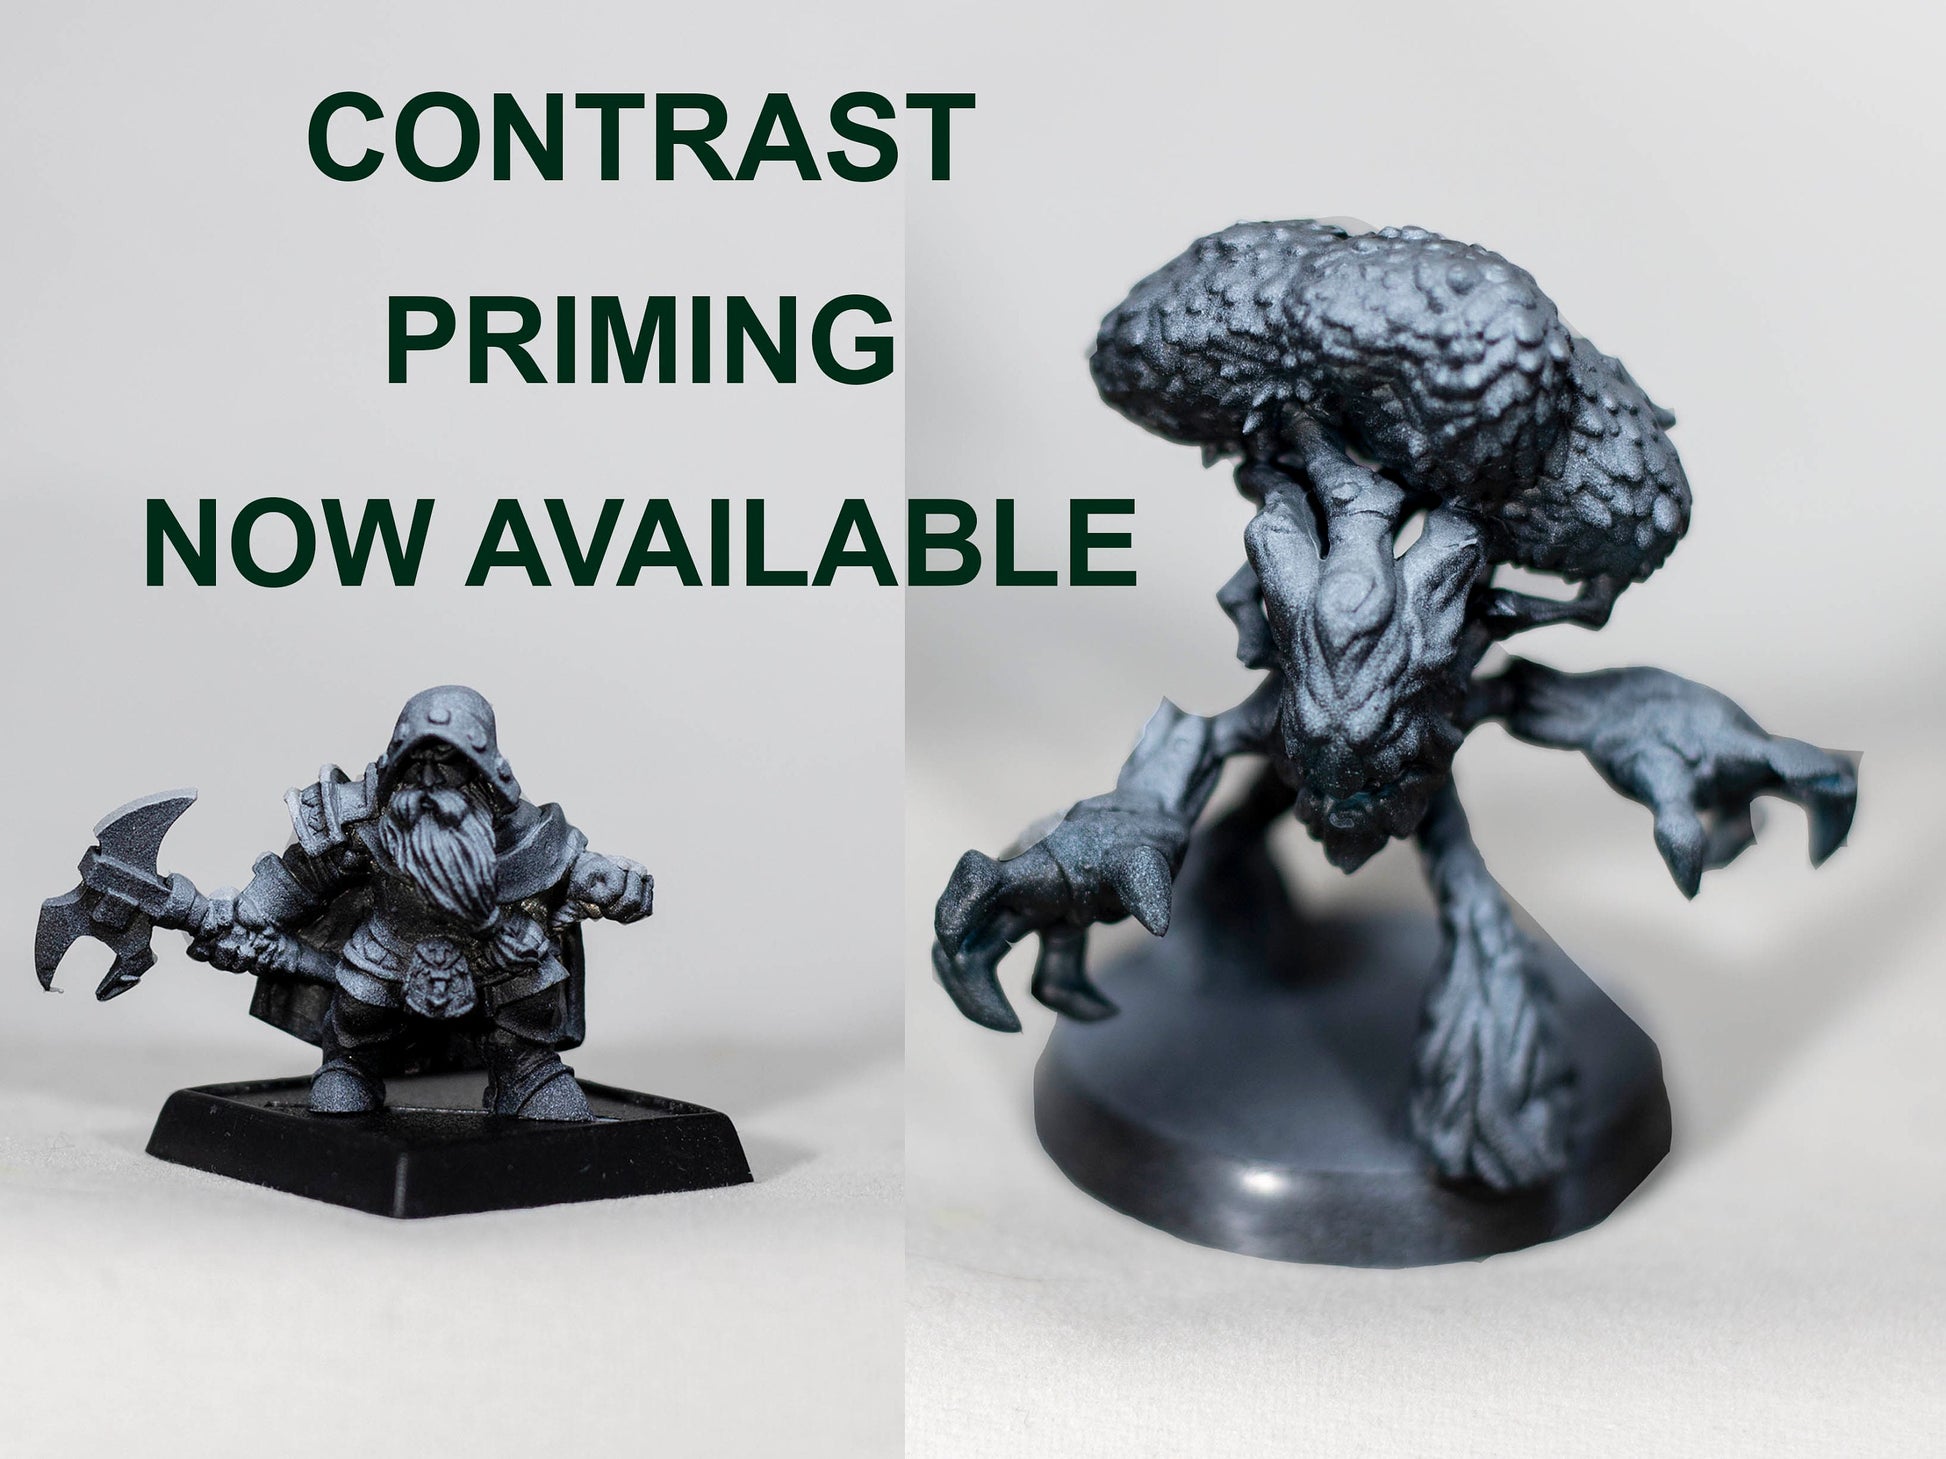 Ctozag Cultist - Cast n Play Printed Miniature | Dungeons & Dragons | Pathfinder | Tabletop